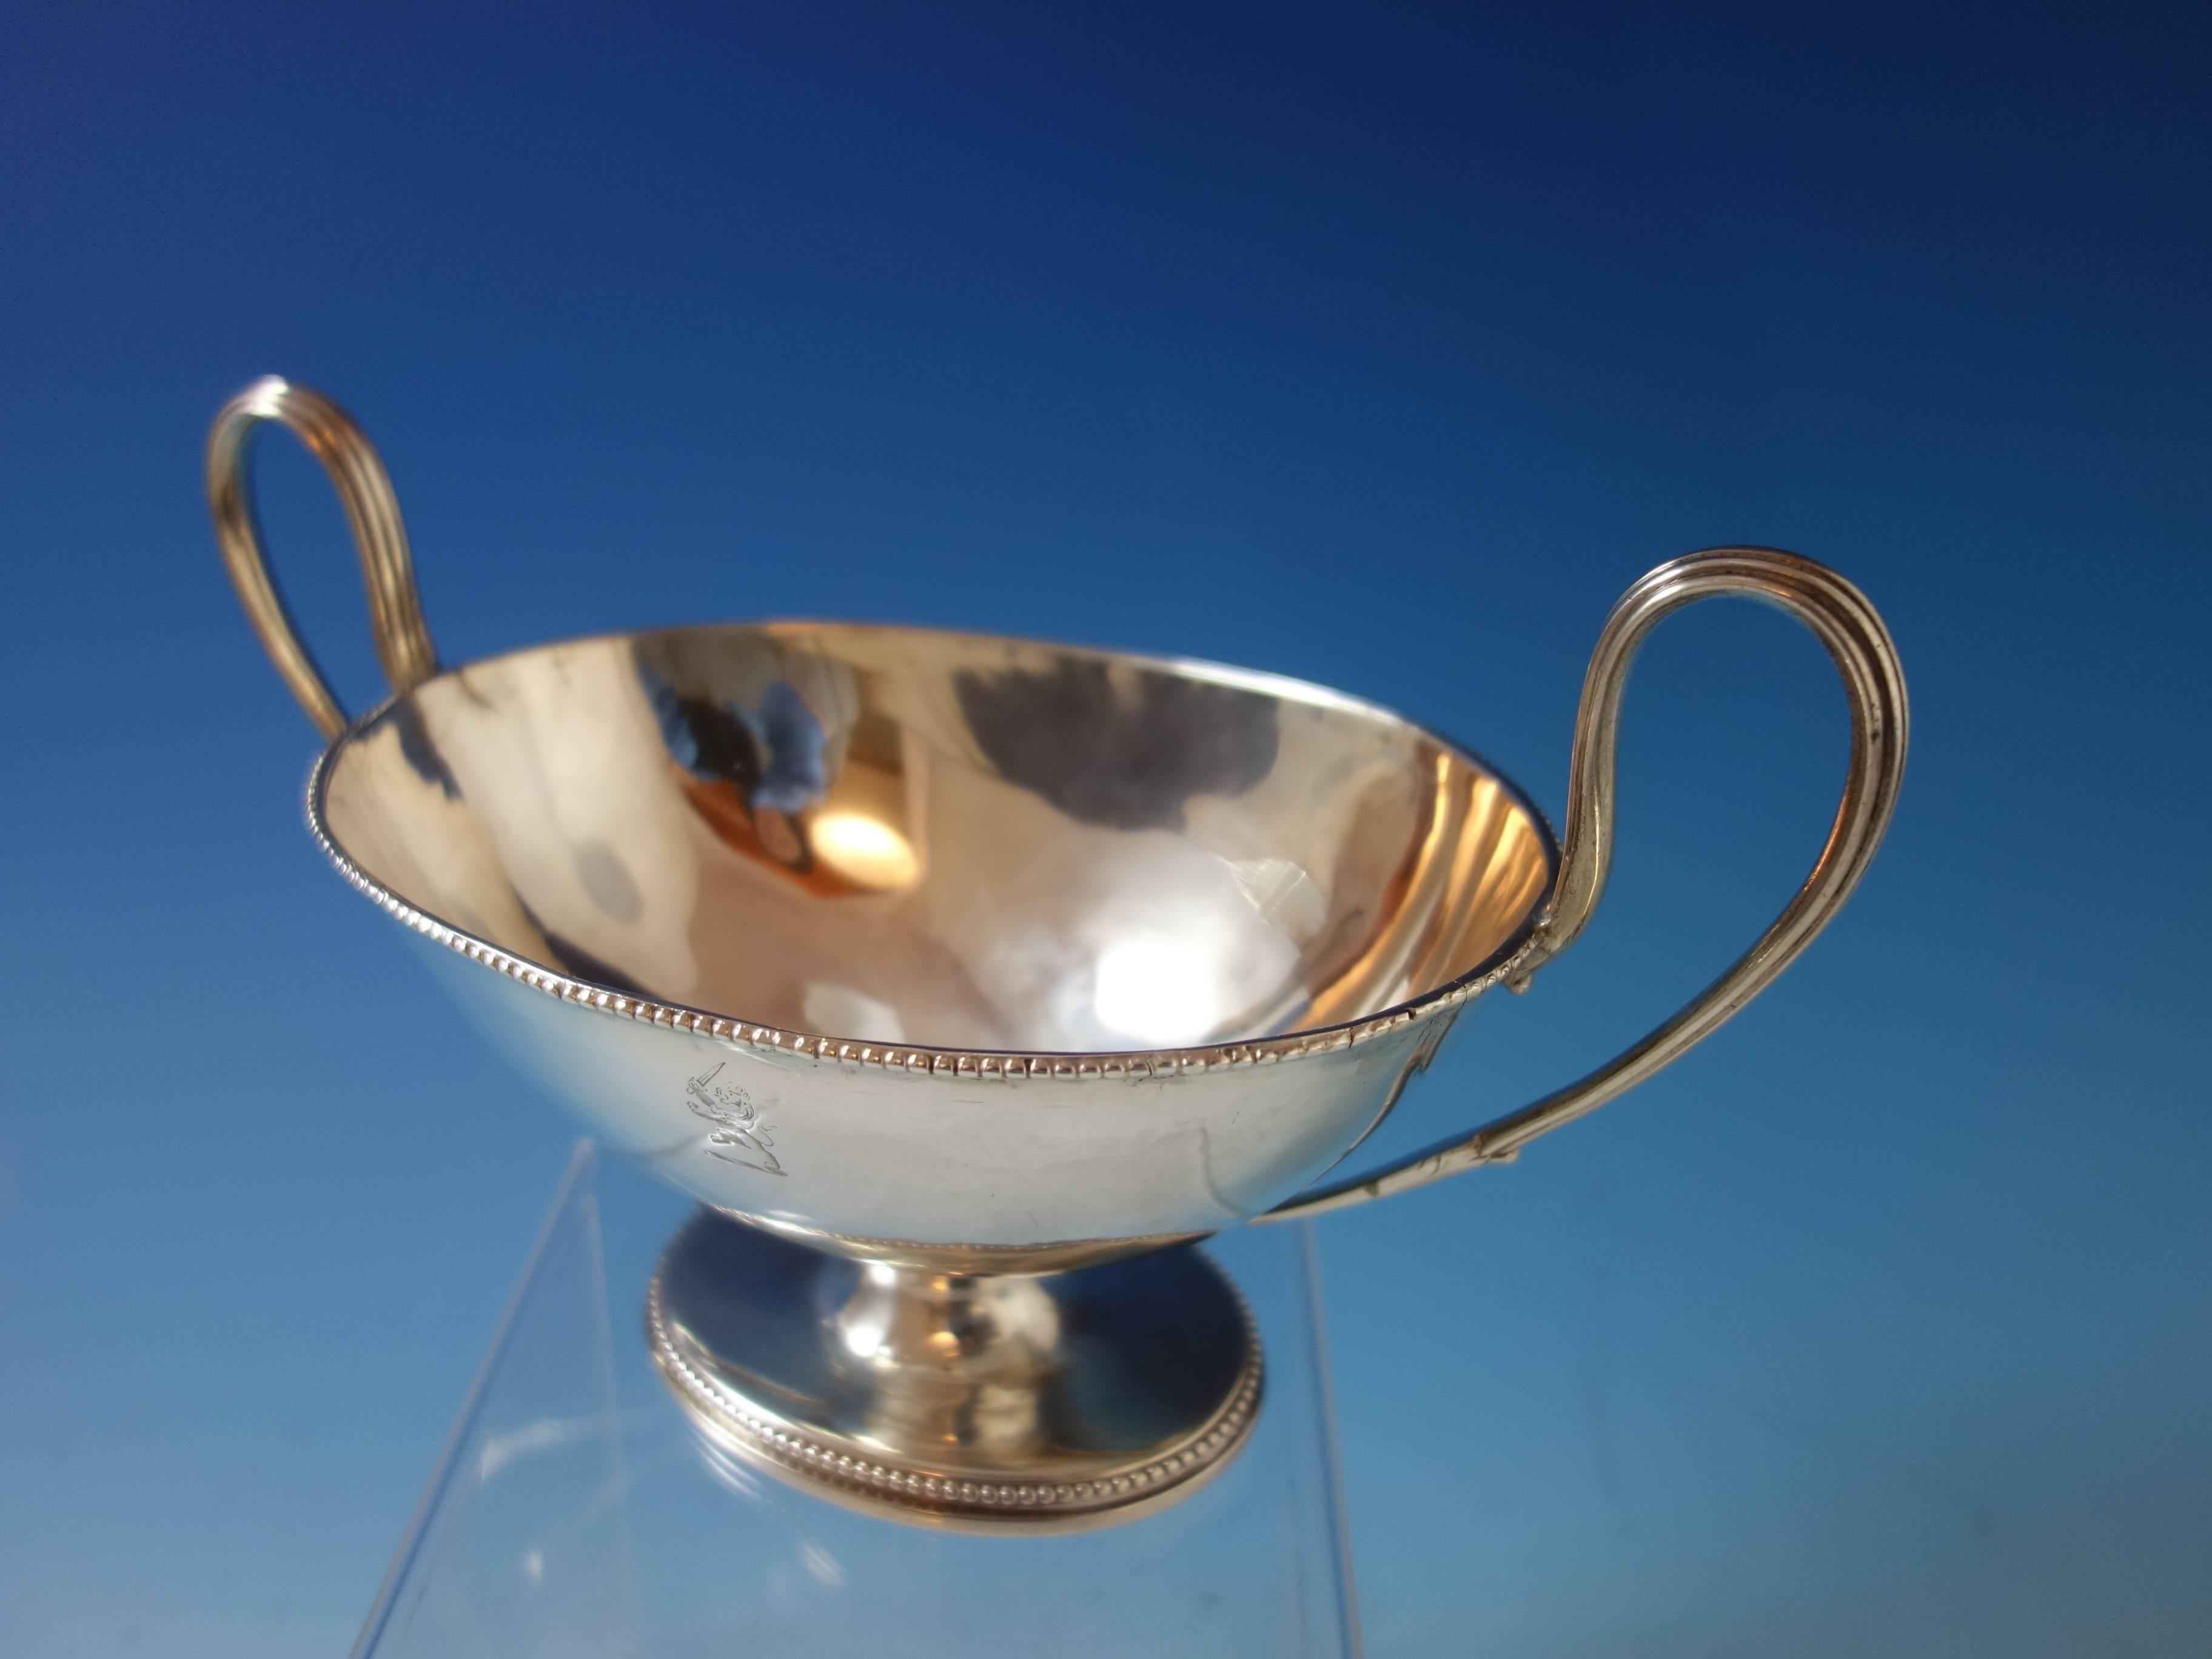 English sterling silver gravy boat (with no cover). It was made in London by Robert Hennell I in 1780. This piece weighs 11.3 troy ounces and measures 5 1/2